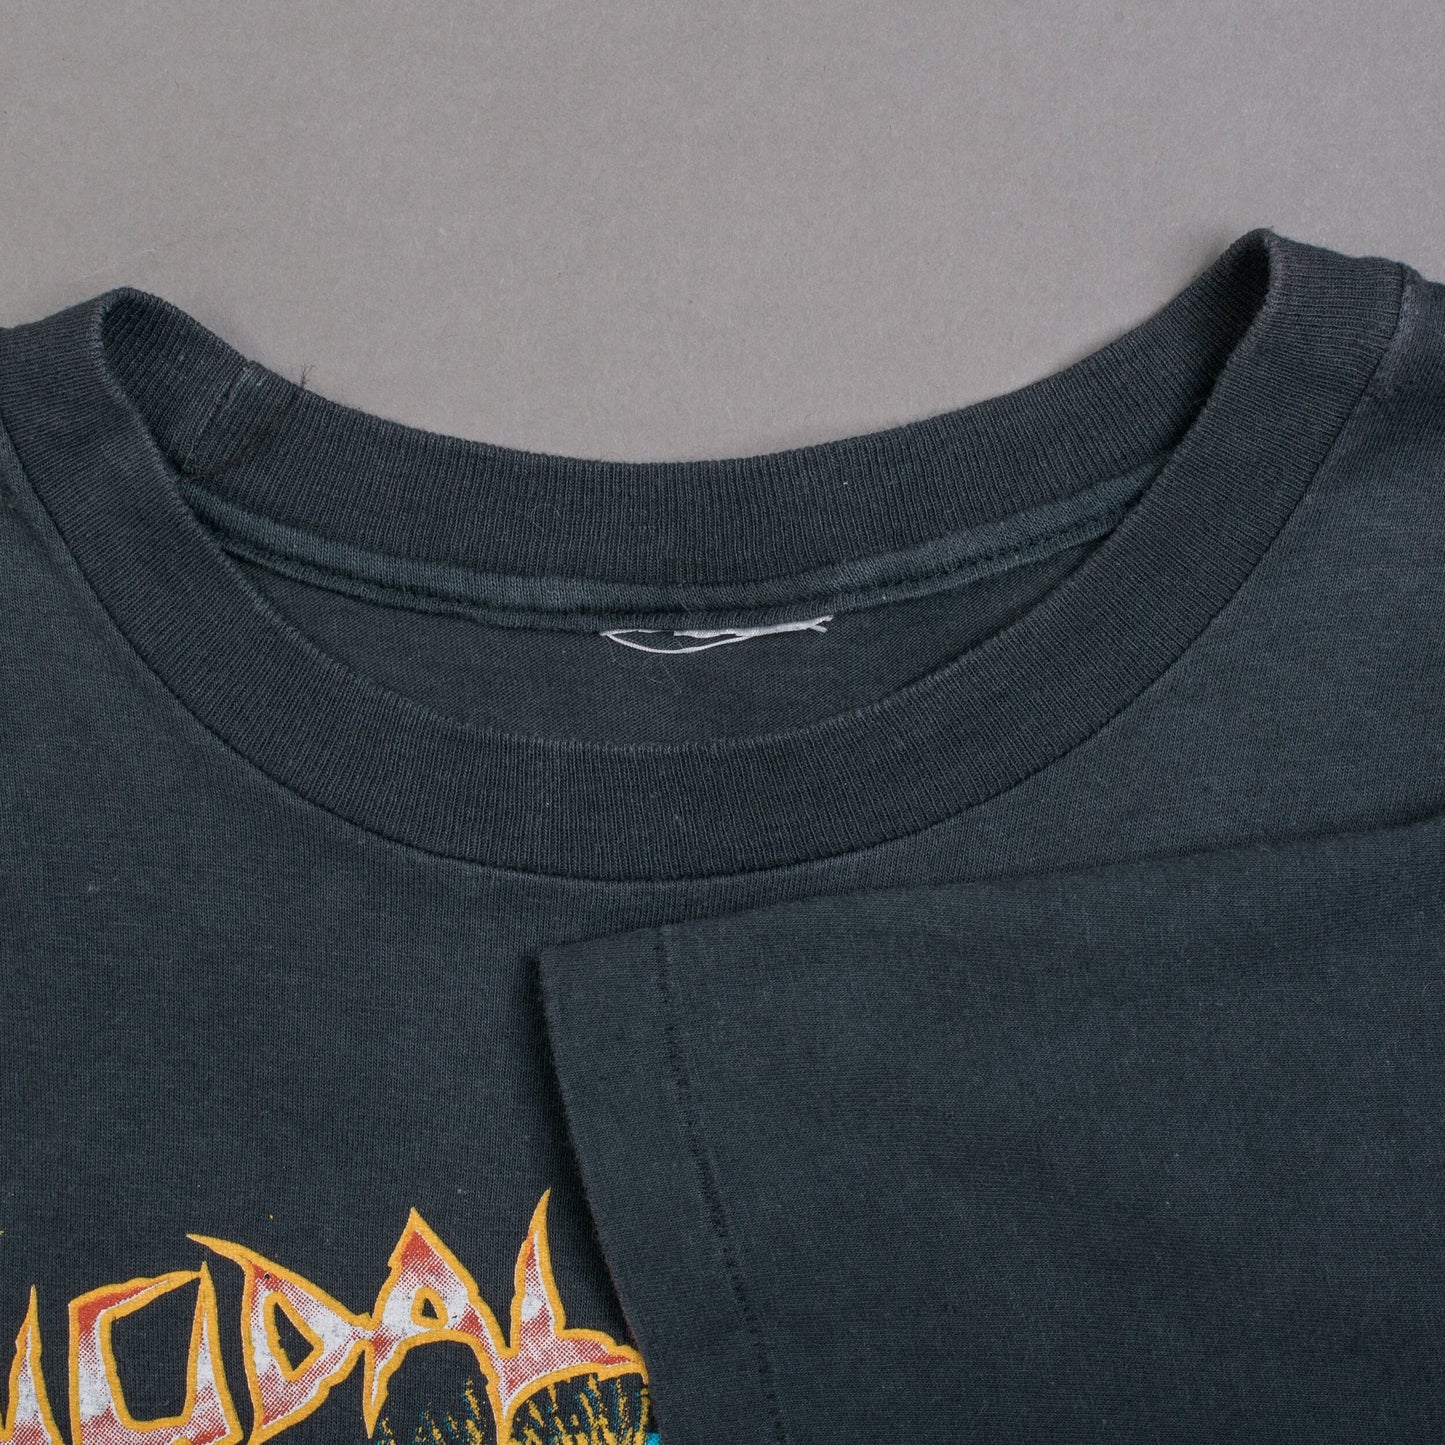 Vintage 1989 Suicidal Tendencies Join The Army T-Shirt